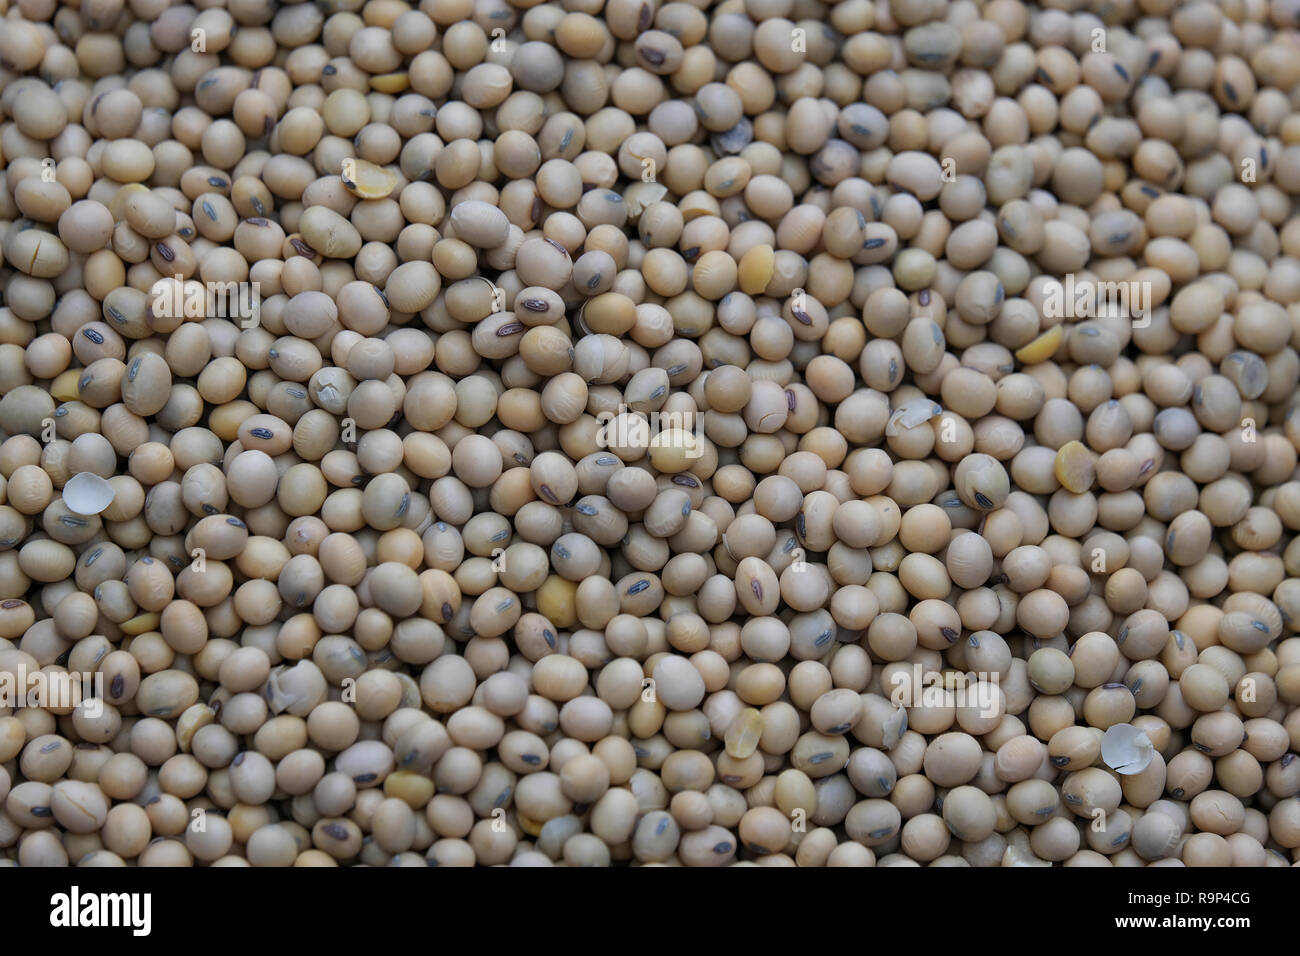 Soya bean seed, soybeans or Glycine max. Royalty high-quality free stock image heap of Soya bean seed, soybeans background with copy space Stock Photo